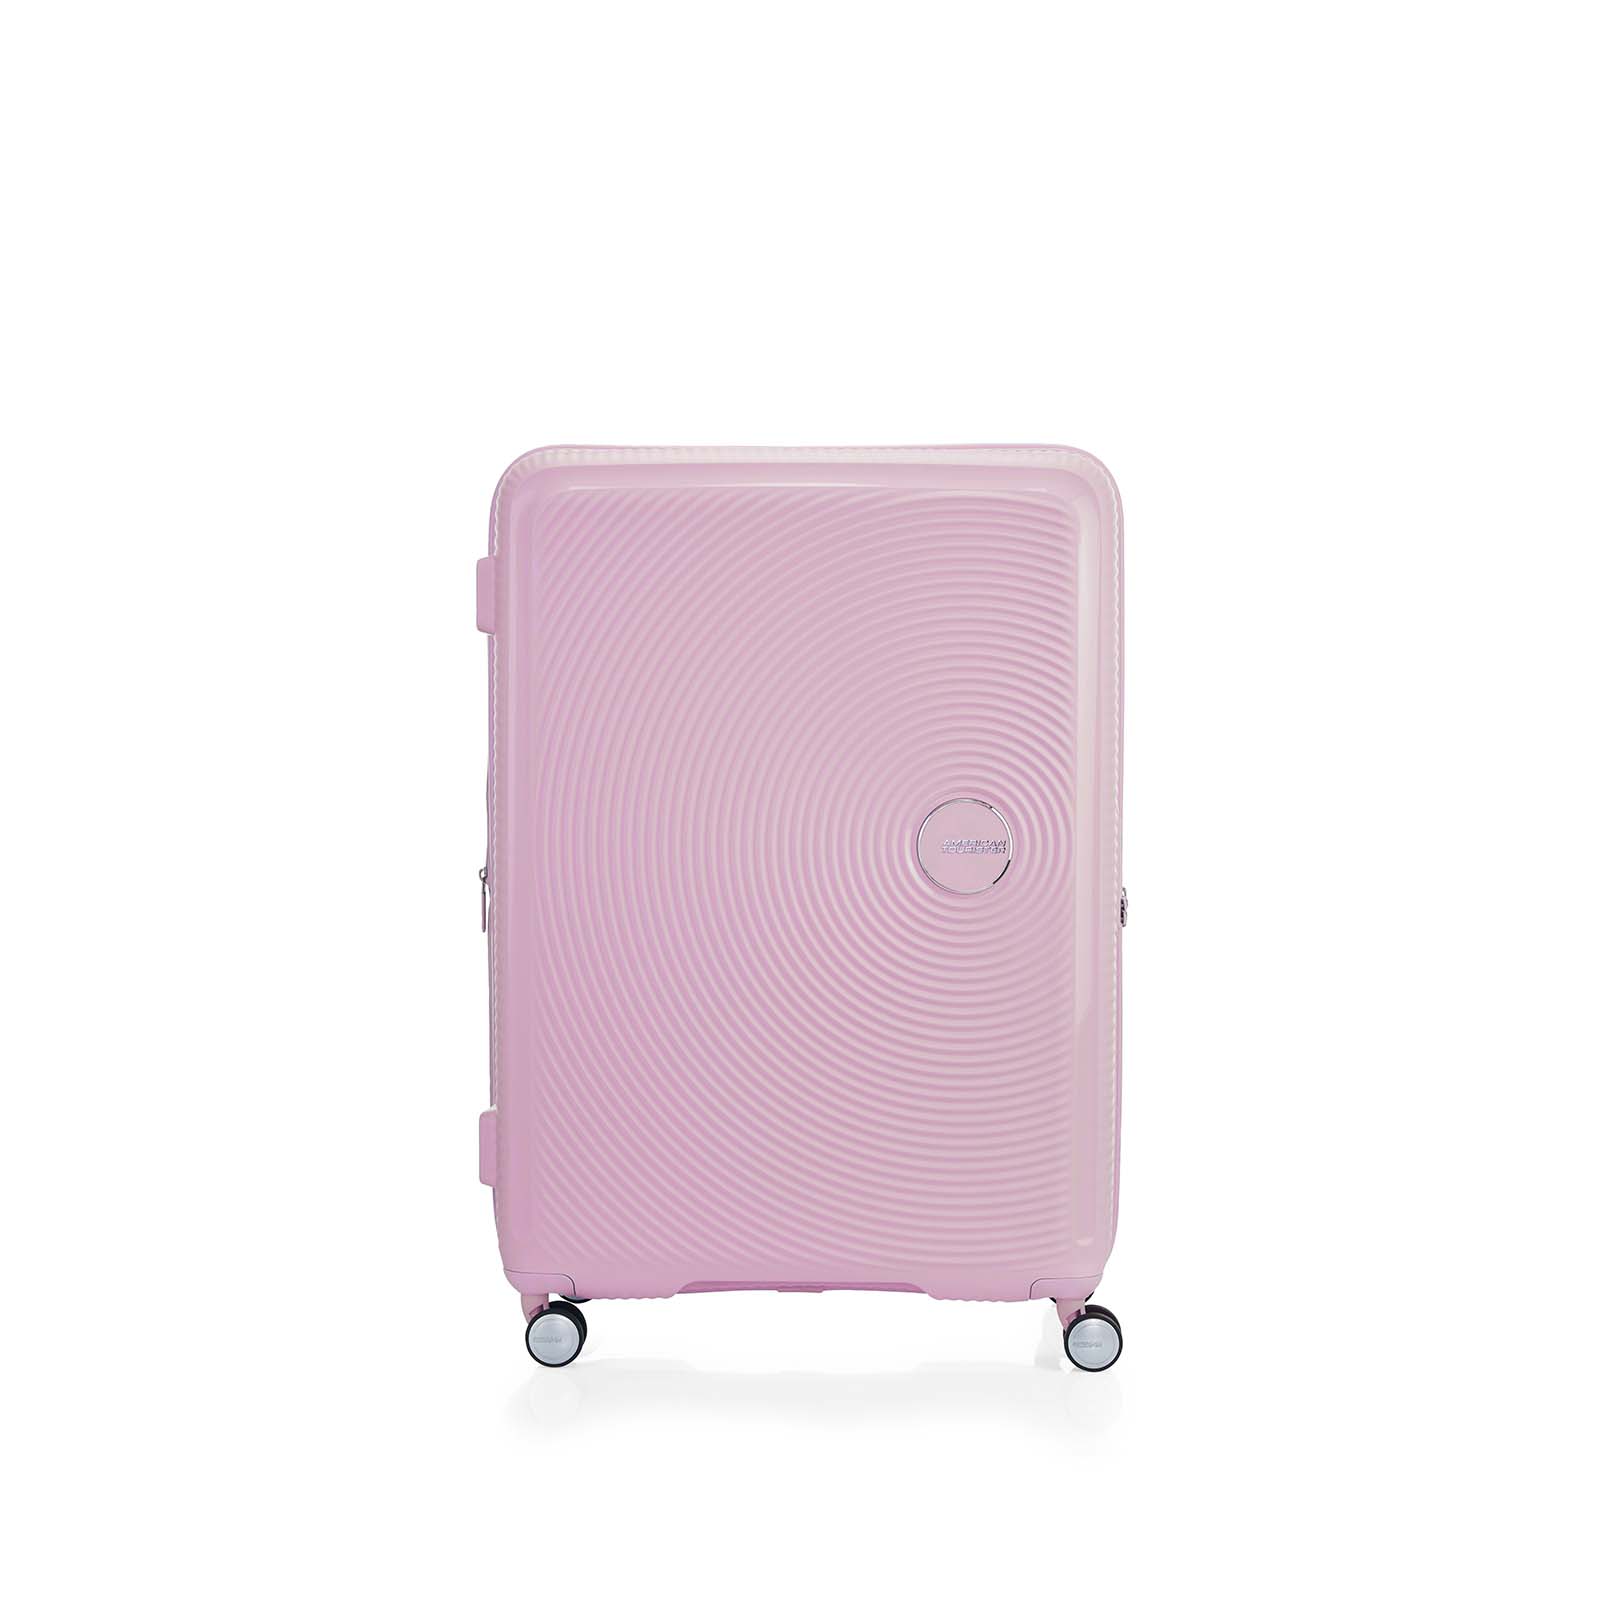 American-Tourister-Curio-2-80cm-Suitcase-Fresh-Pink-Front